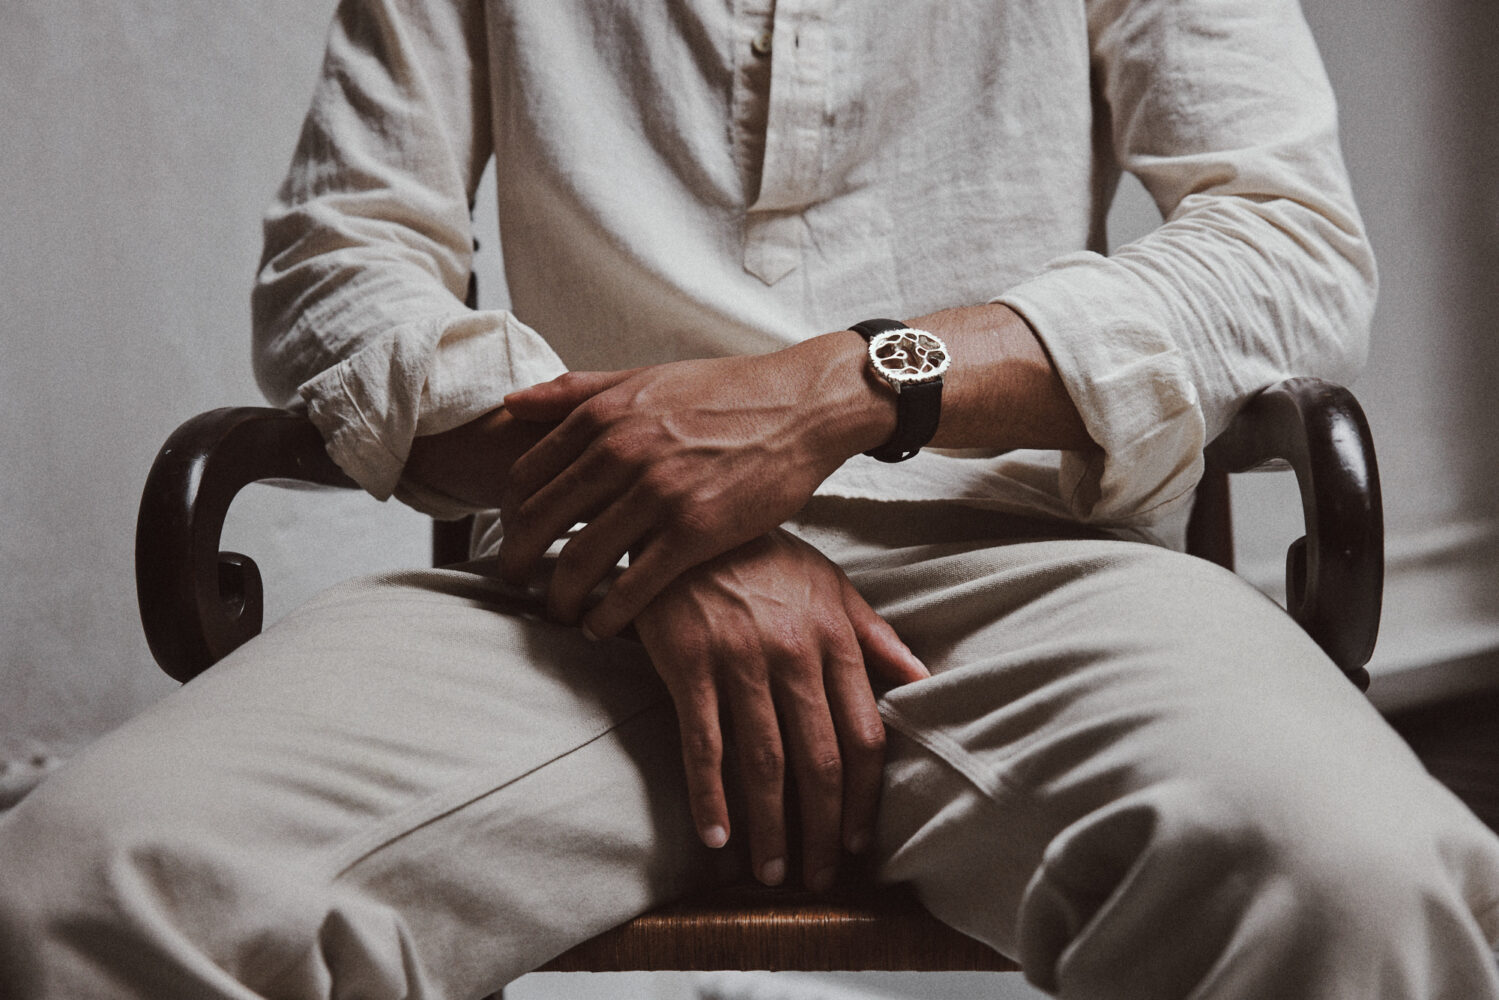 Detail of hands and watch, collaboration with The All Watch.